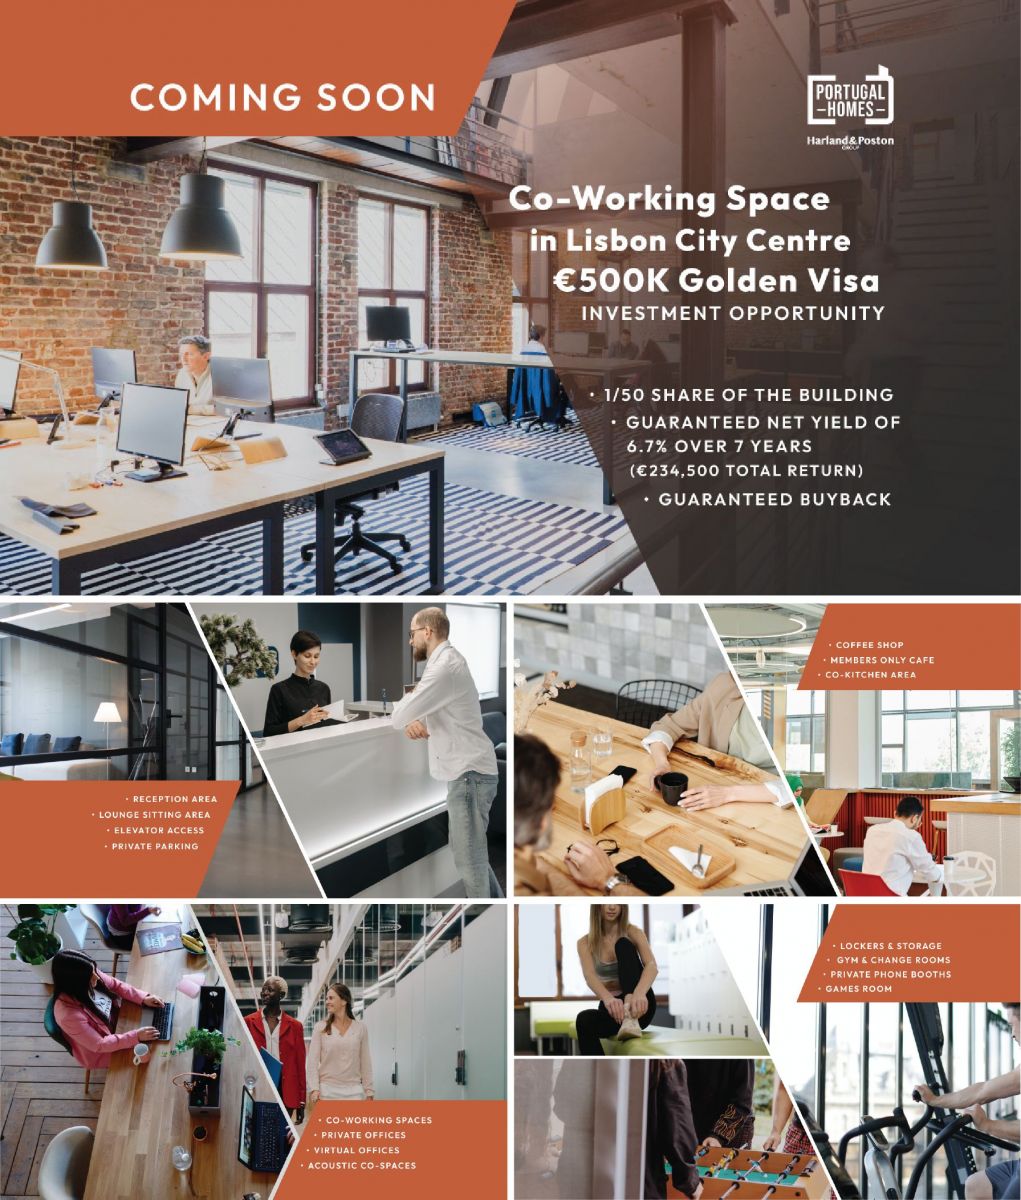 New co-working space in Lisbon City Centre that is eligible for €500K Golden Visa.